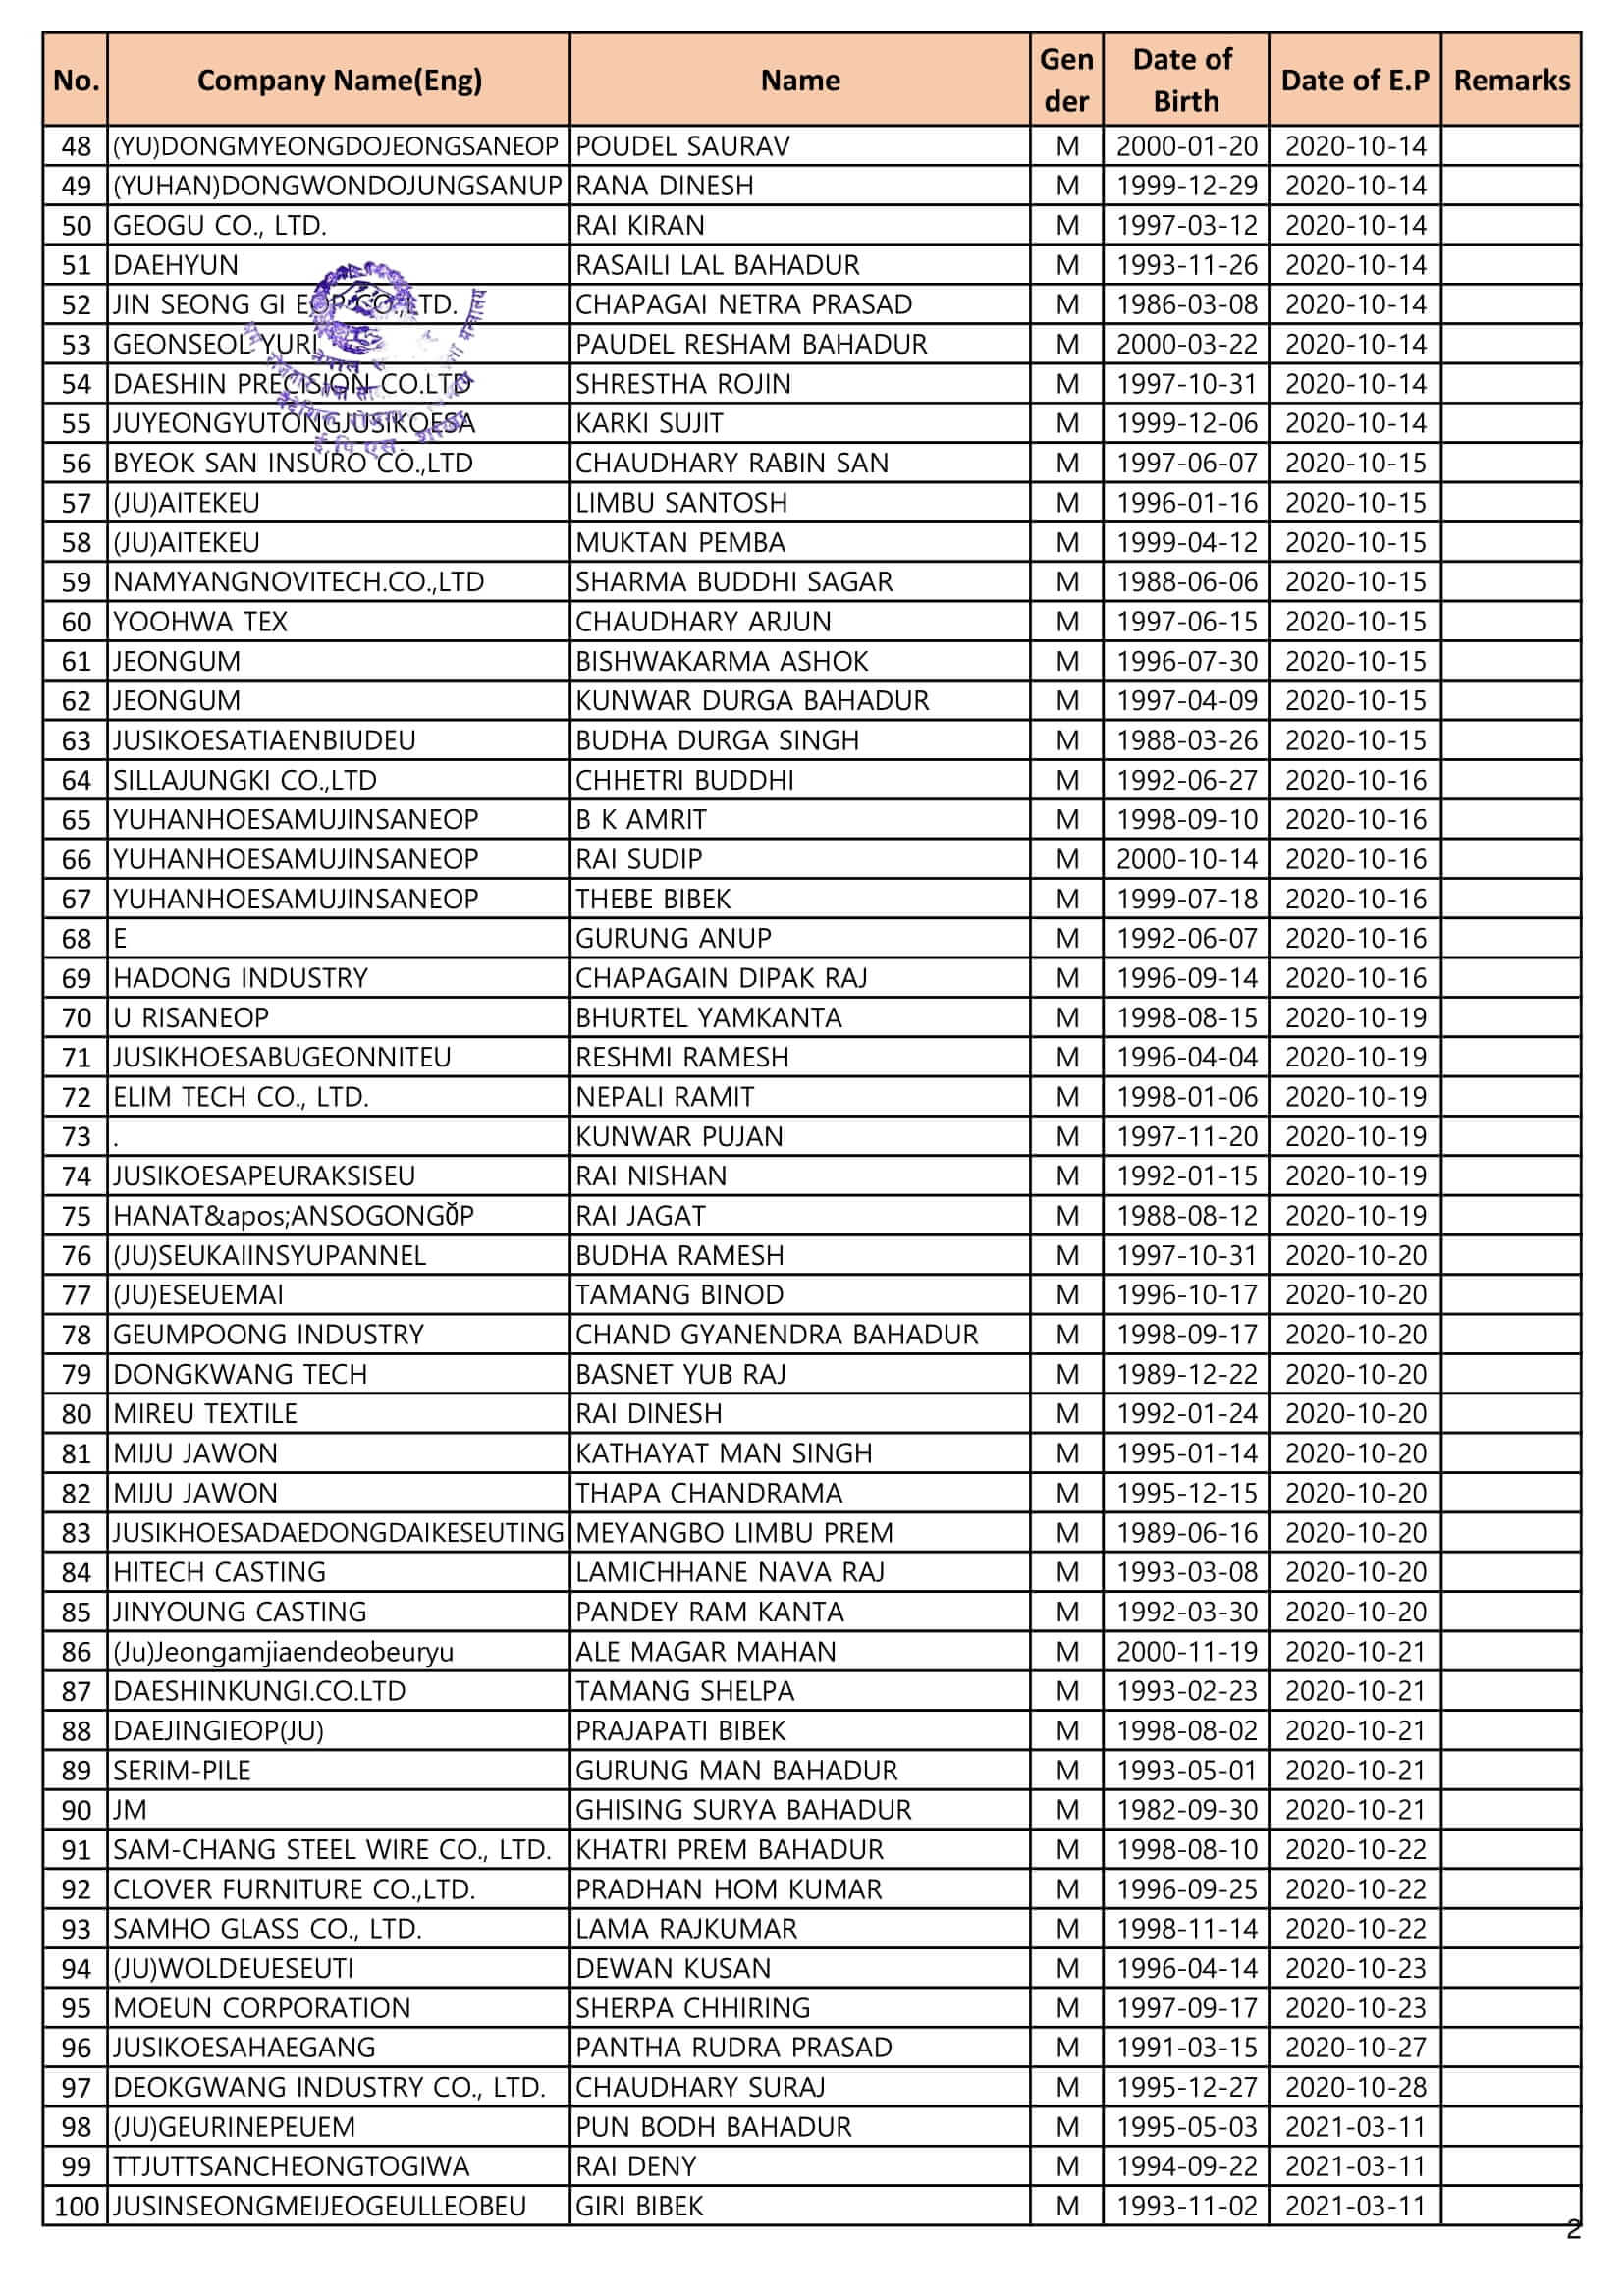 Proposed Entry list of Regular Manufacture Worker